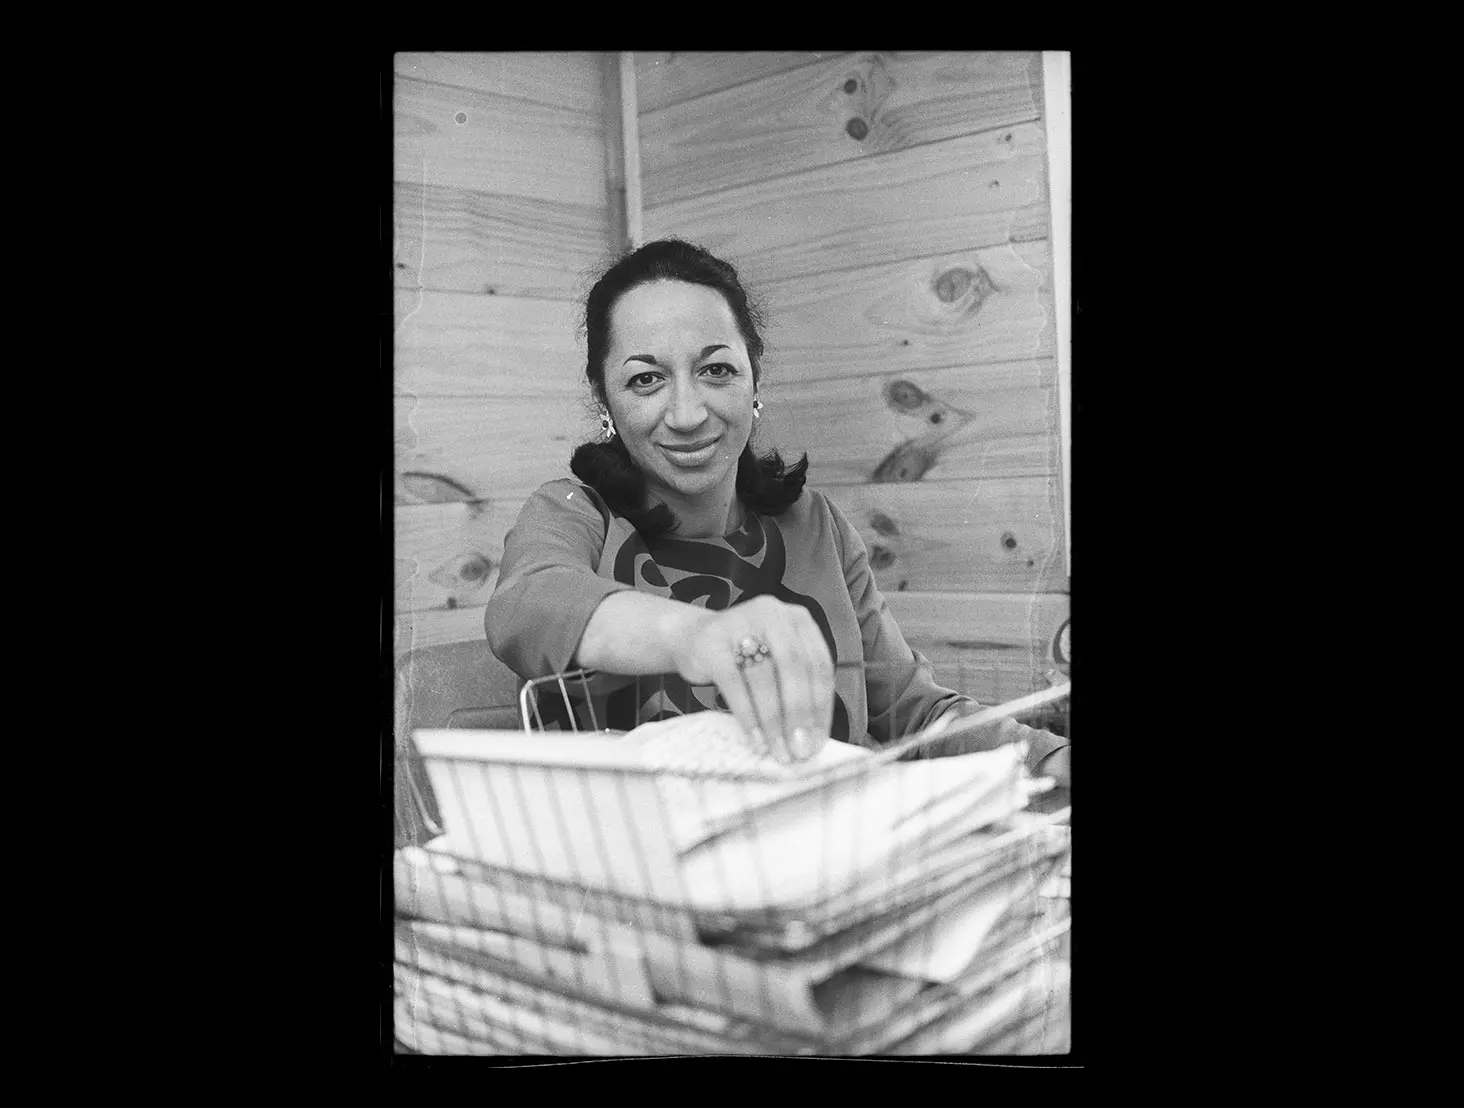 Black and white photo of Whetu Tirikatene-Sullivan smiling and holding out her hand to grab some papers.